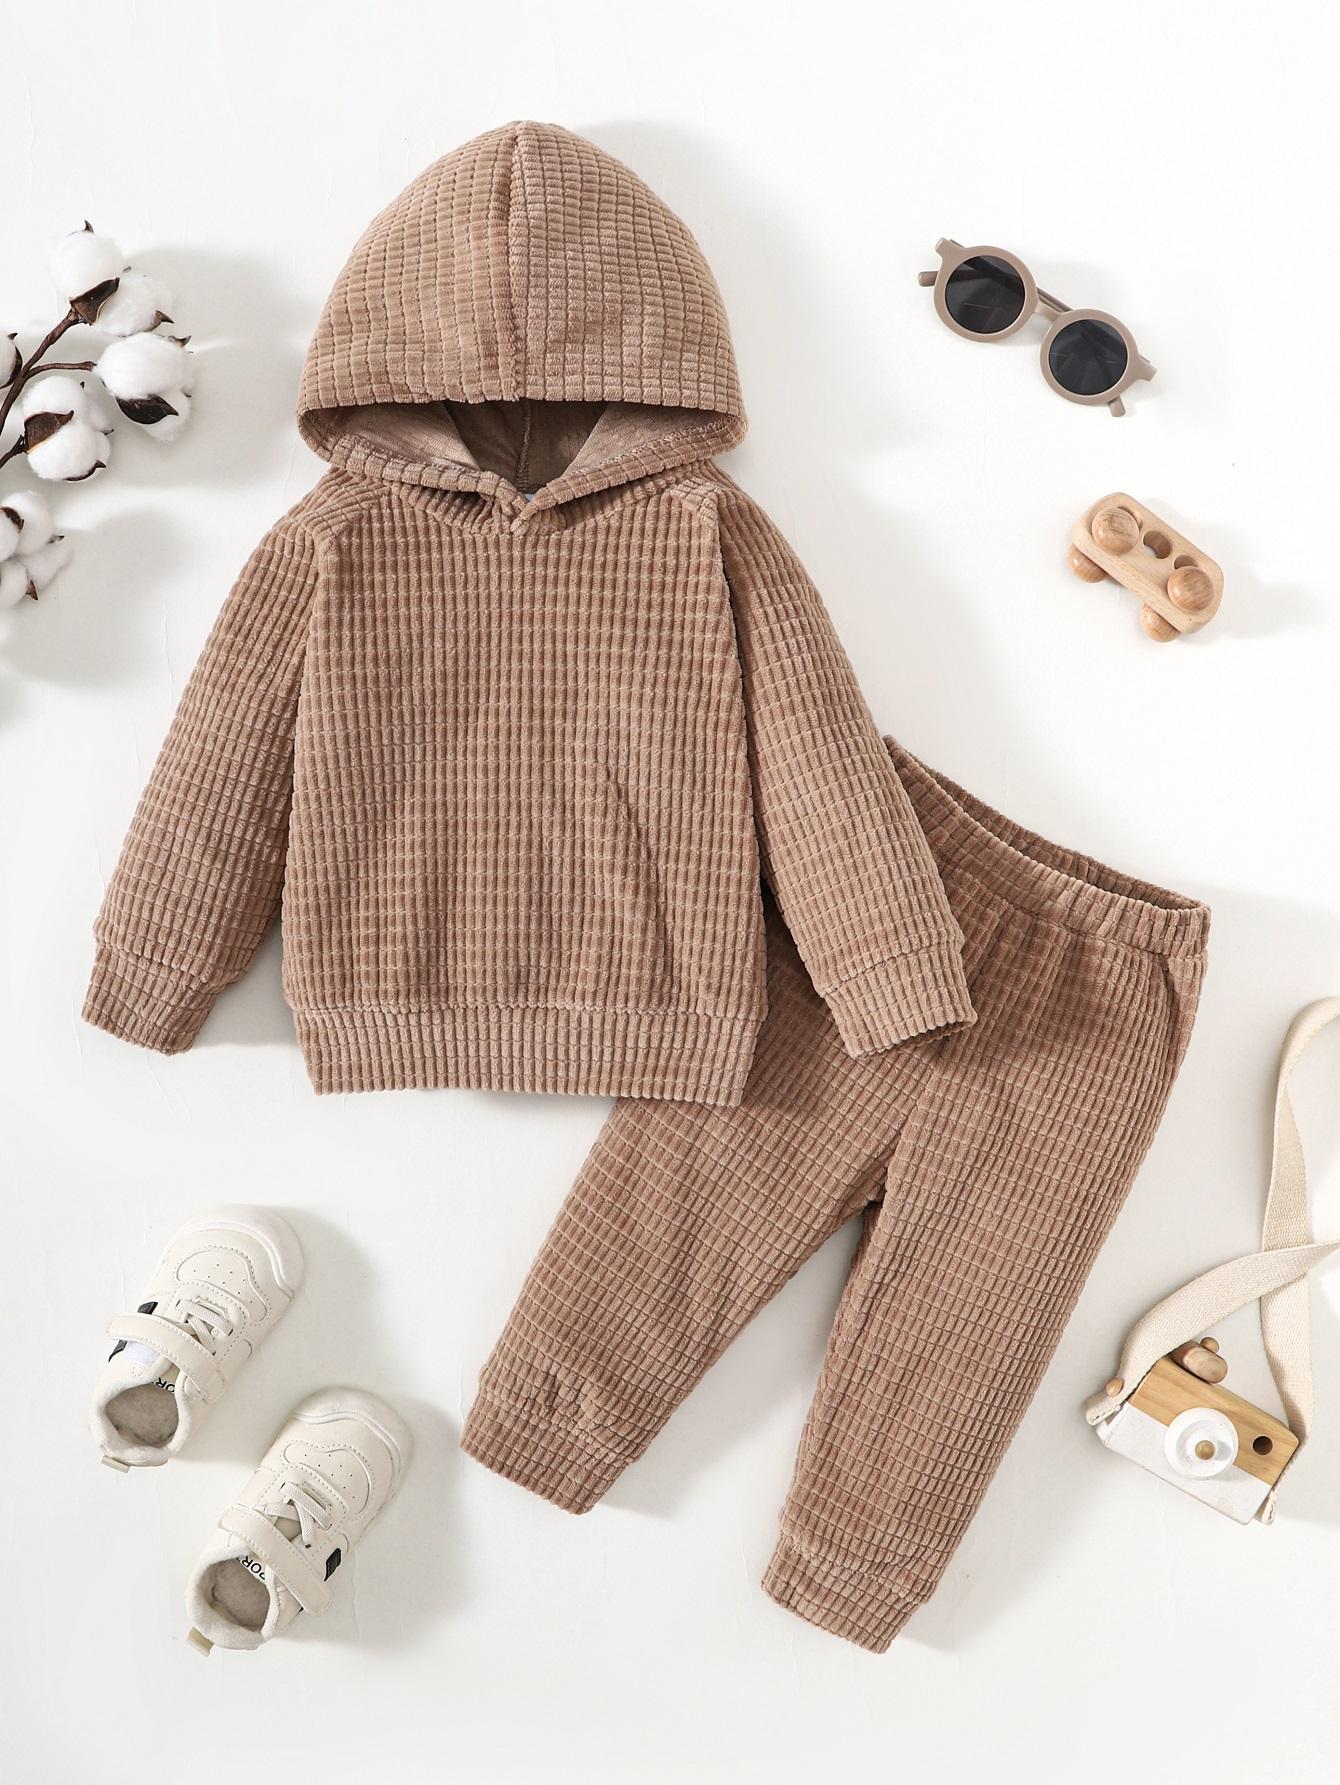 6M-3Y Ready Stock Baby Boys Clothes Boys Waffle Pattern Casual Knitted Long Sleeve Hoodies Tops Elastic Pants 2Pcs Outfits Size: 6M-3Y Khaki Catpapa 462308182